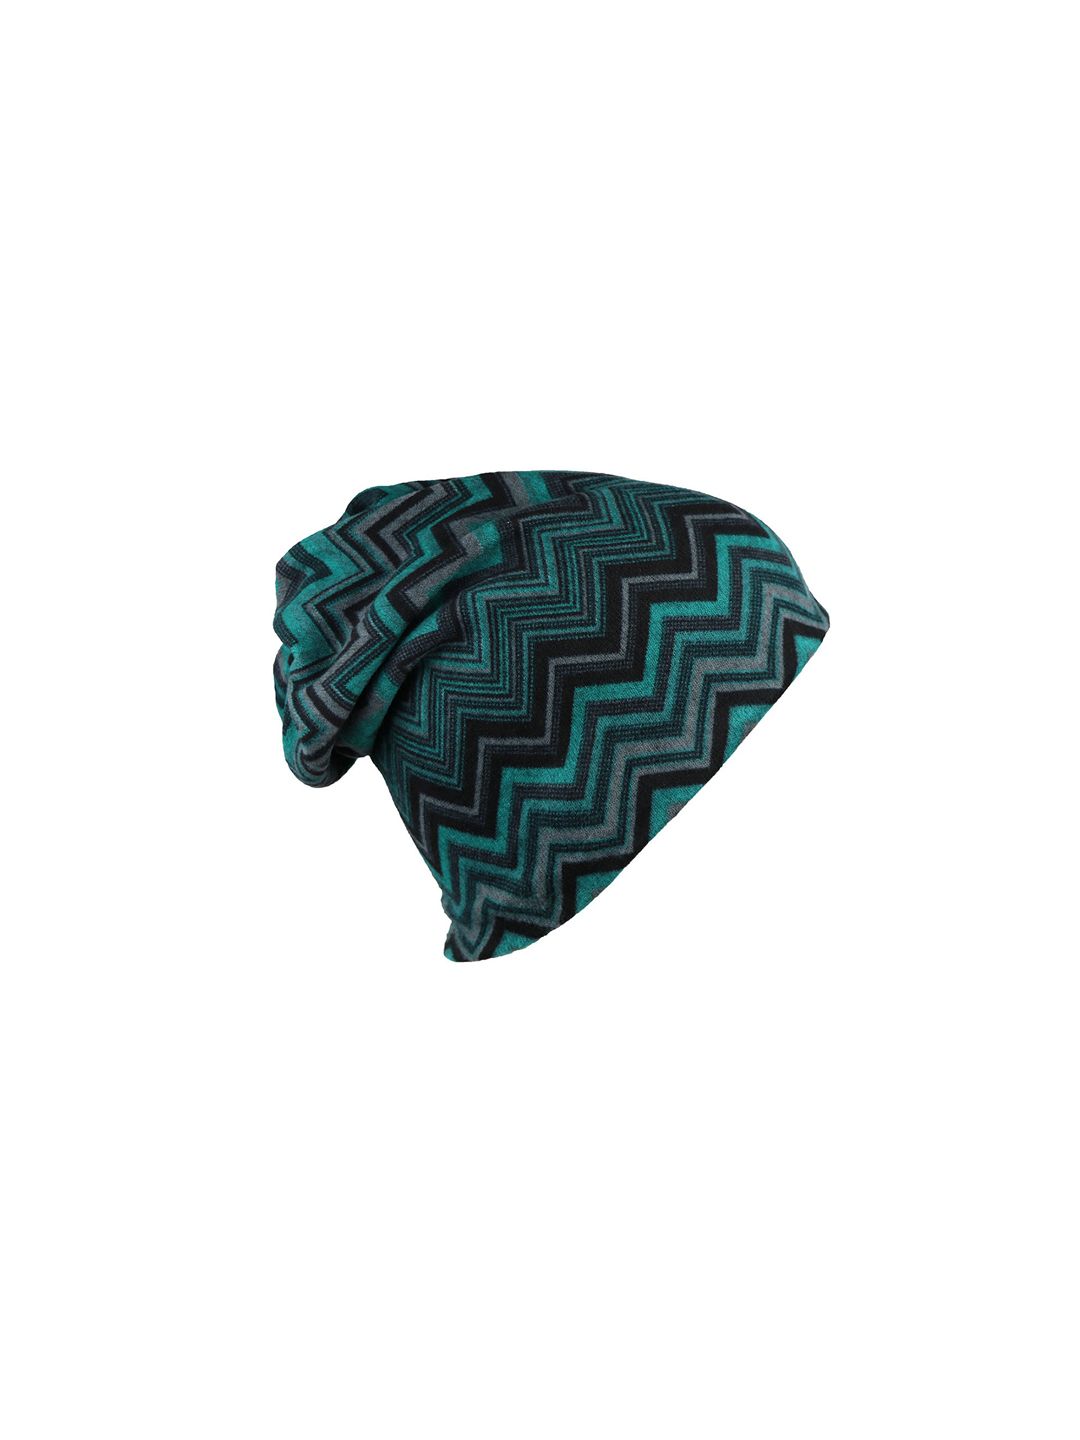 iSWEVEN Unisex Green & Black Chevron Printed Beanie Price in India